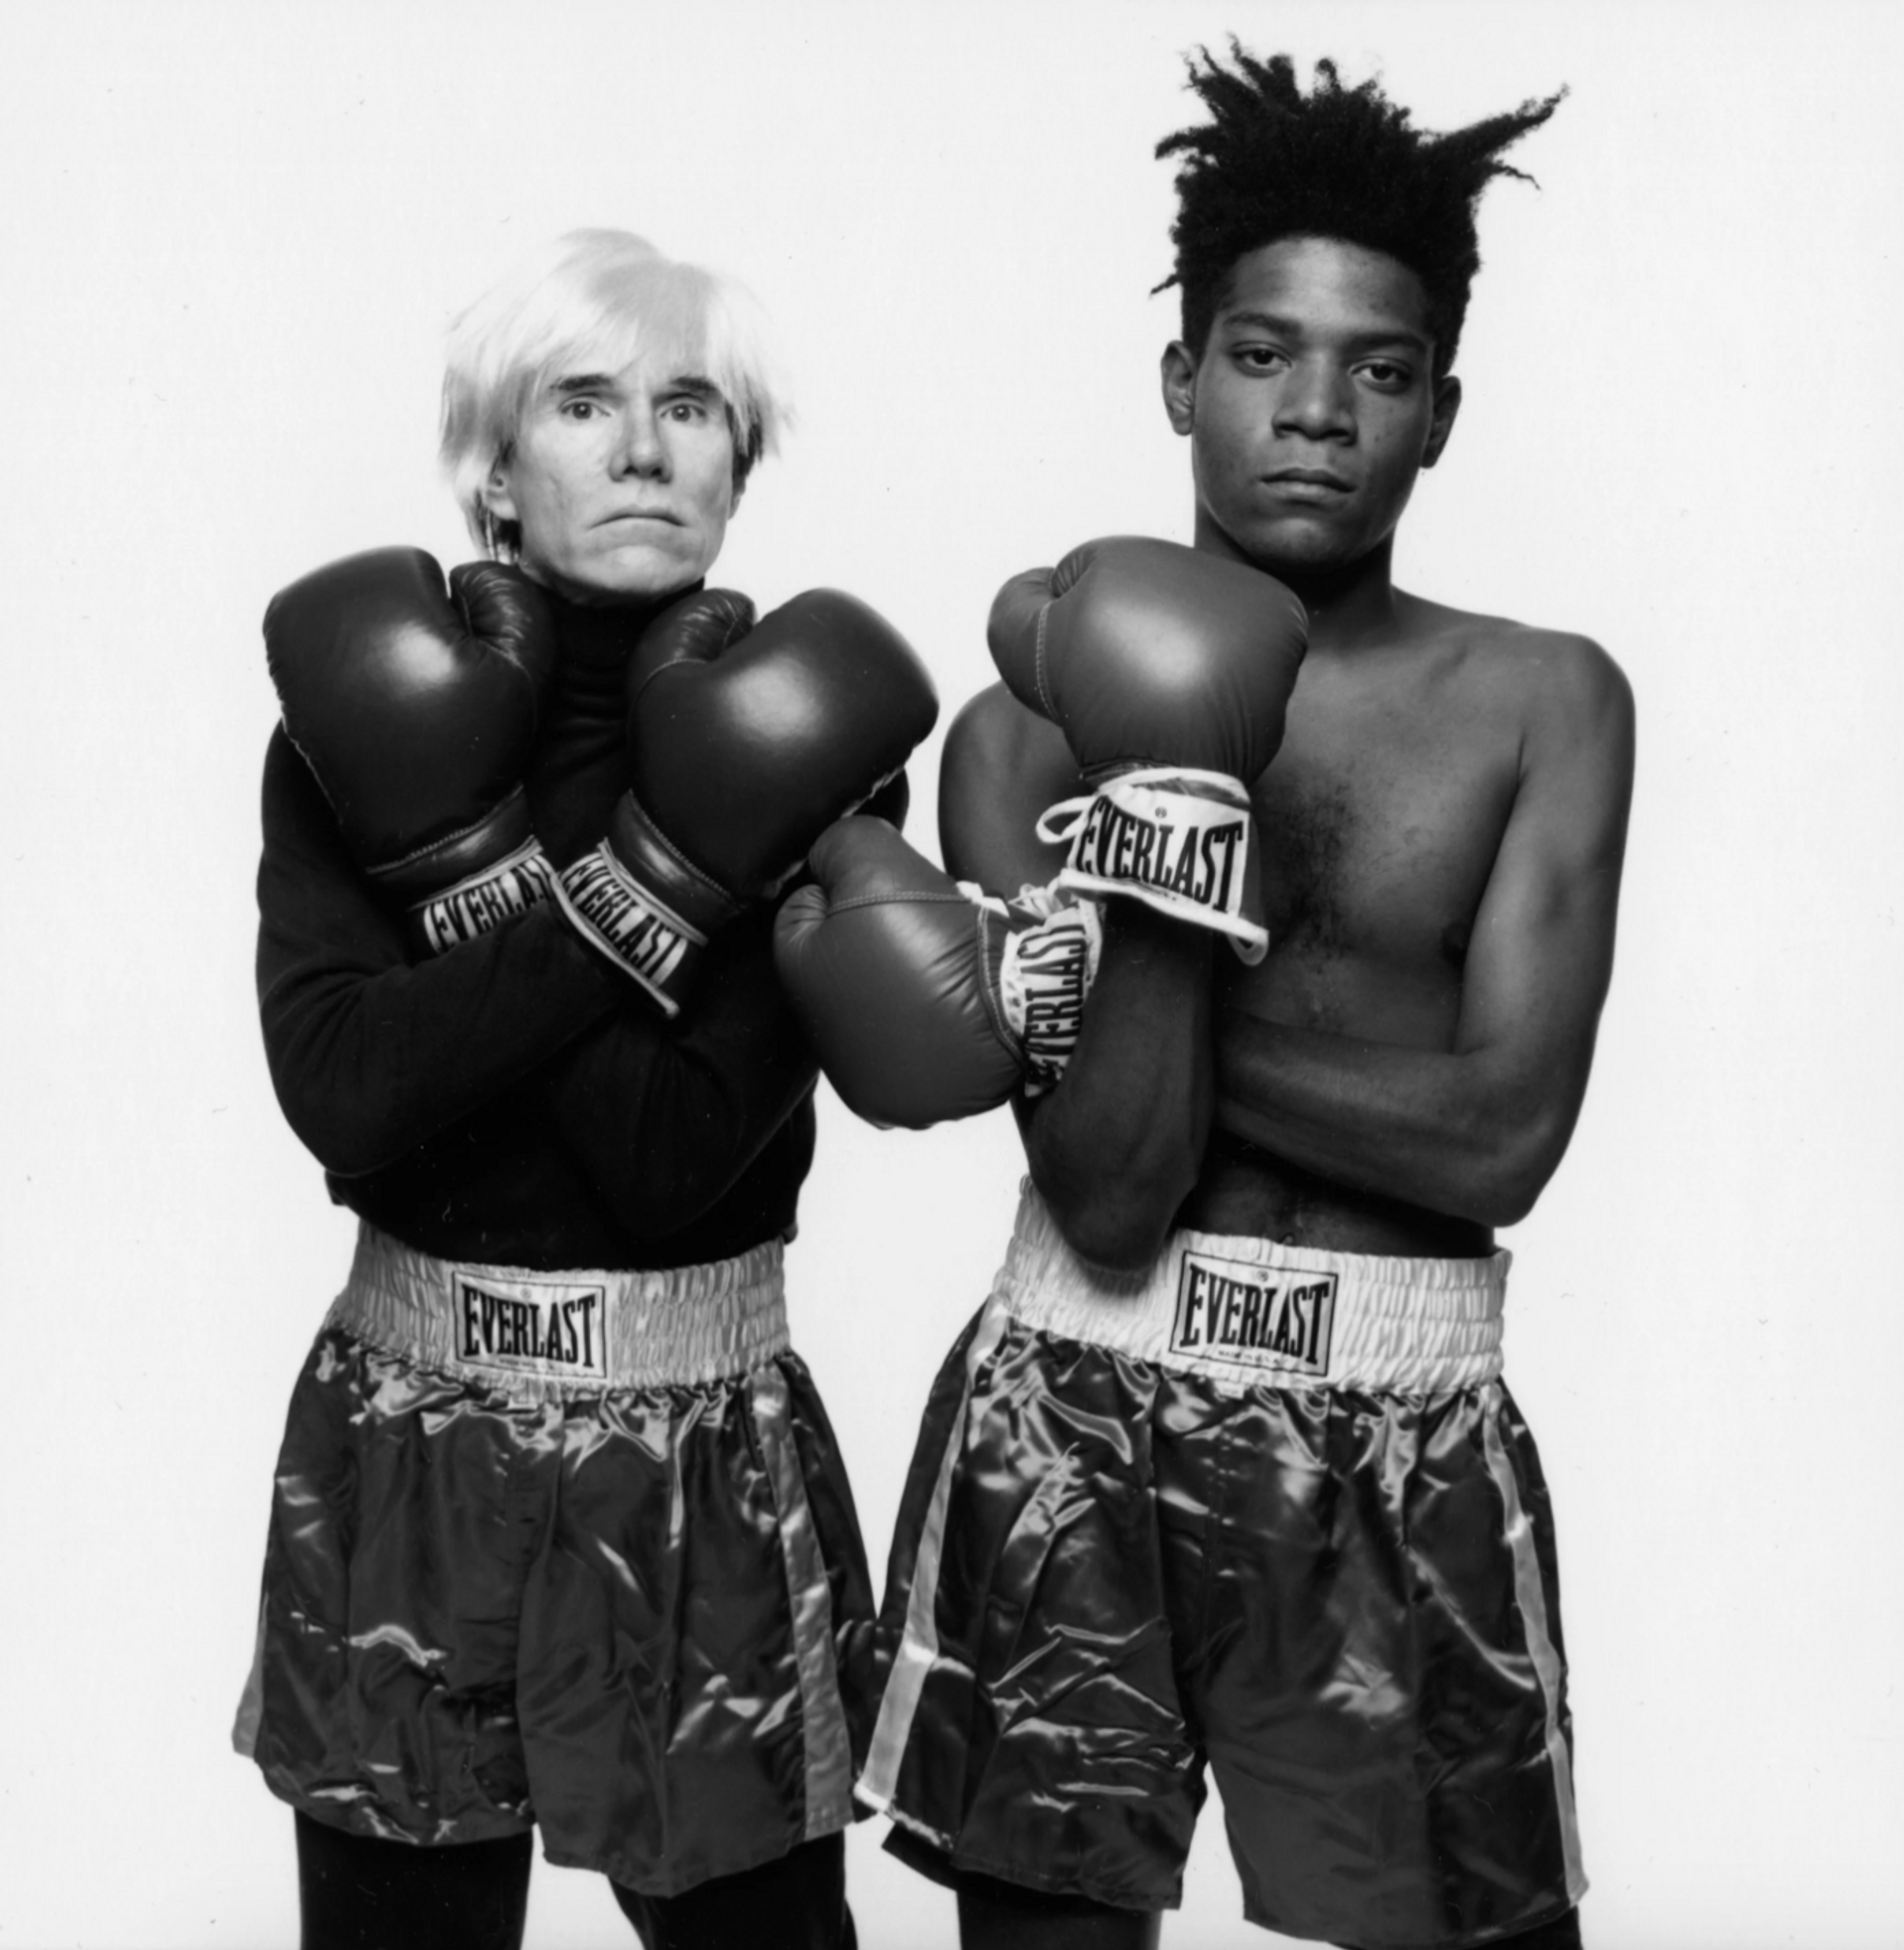 Andy Warhol and Jean-Michel Basquiat, New York 1985.